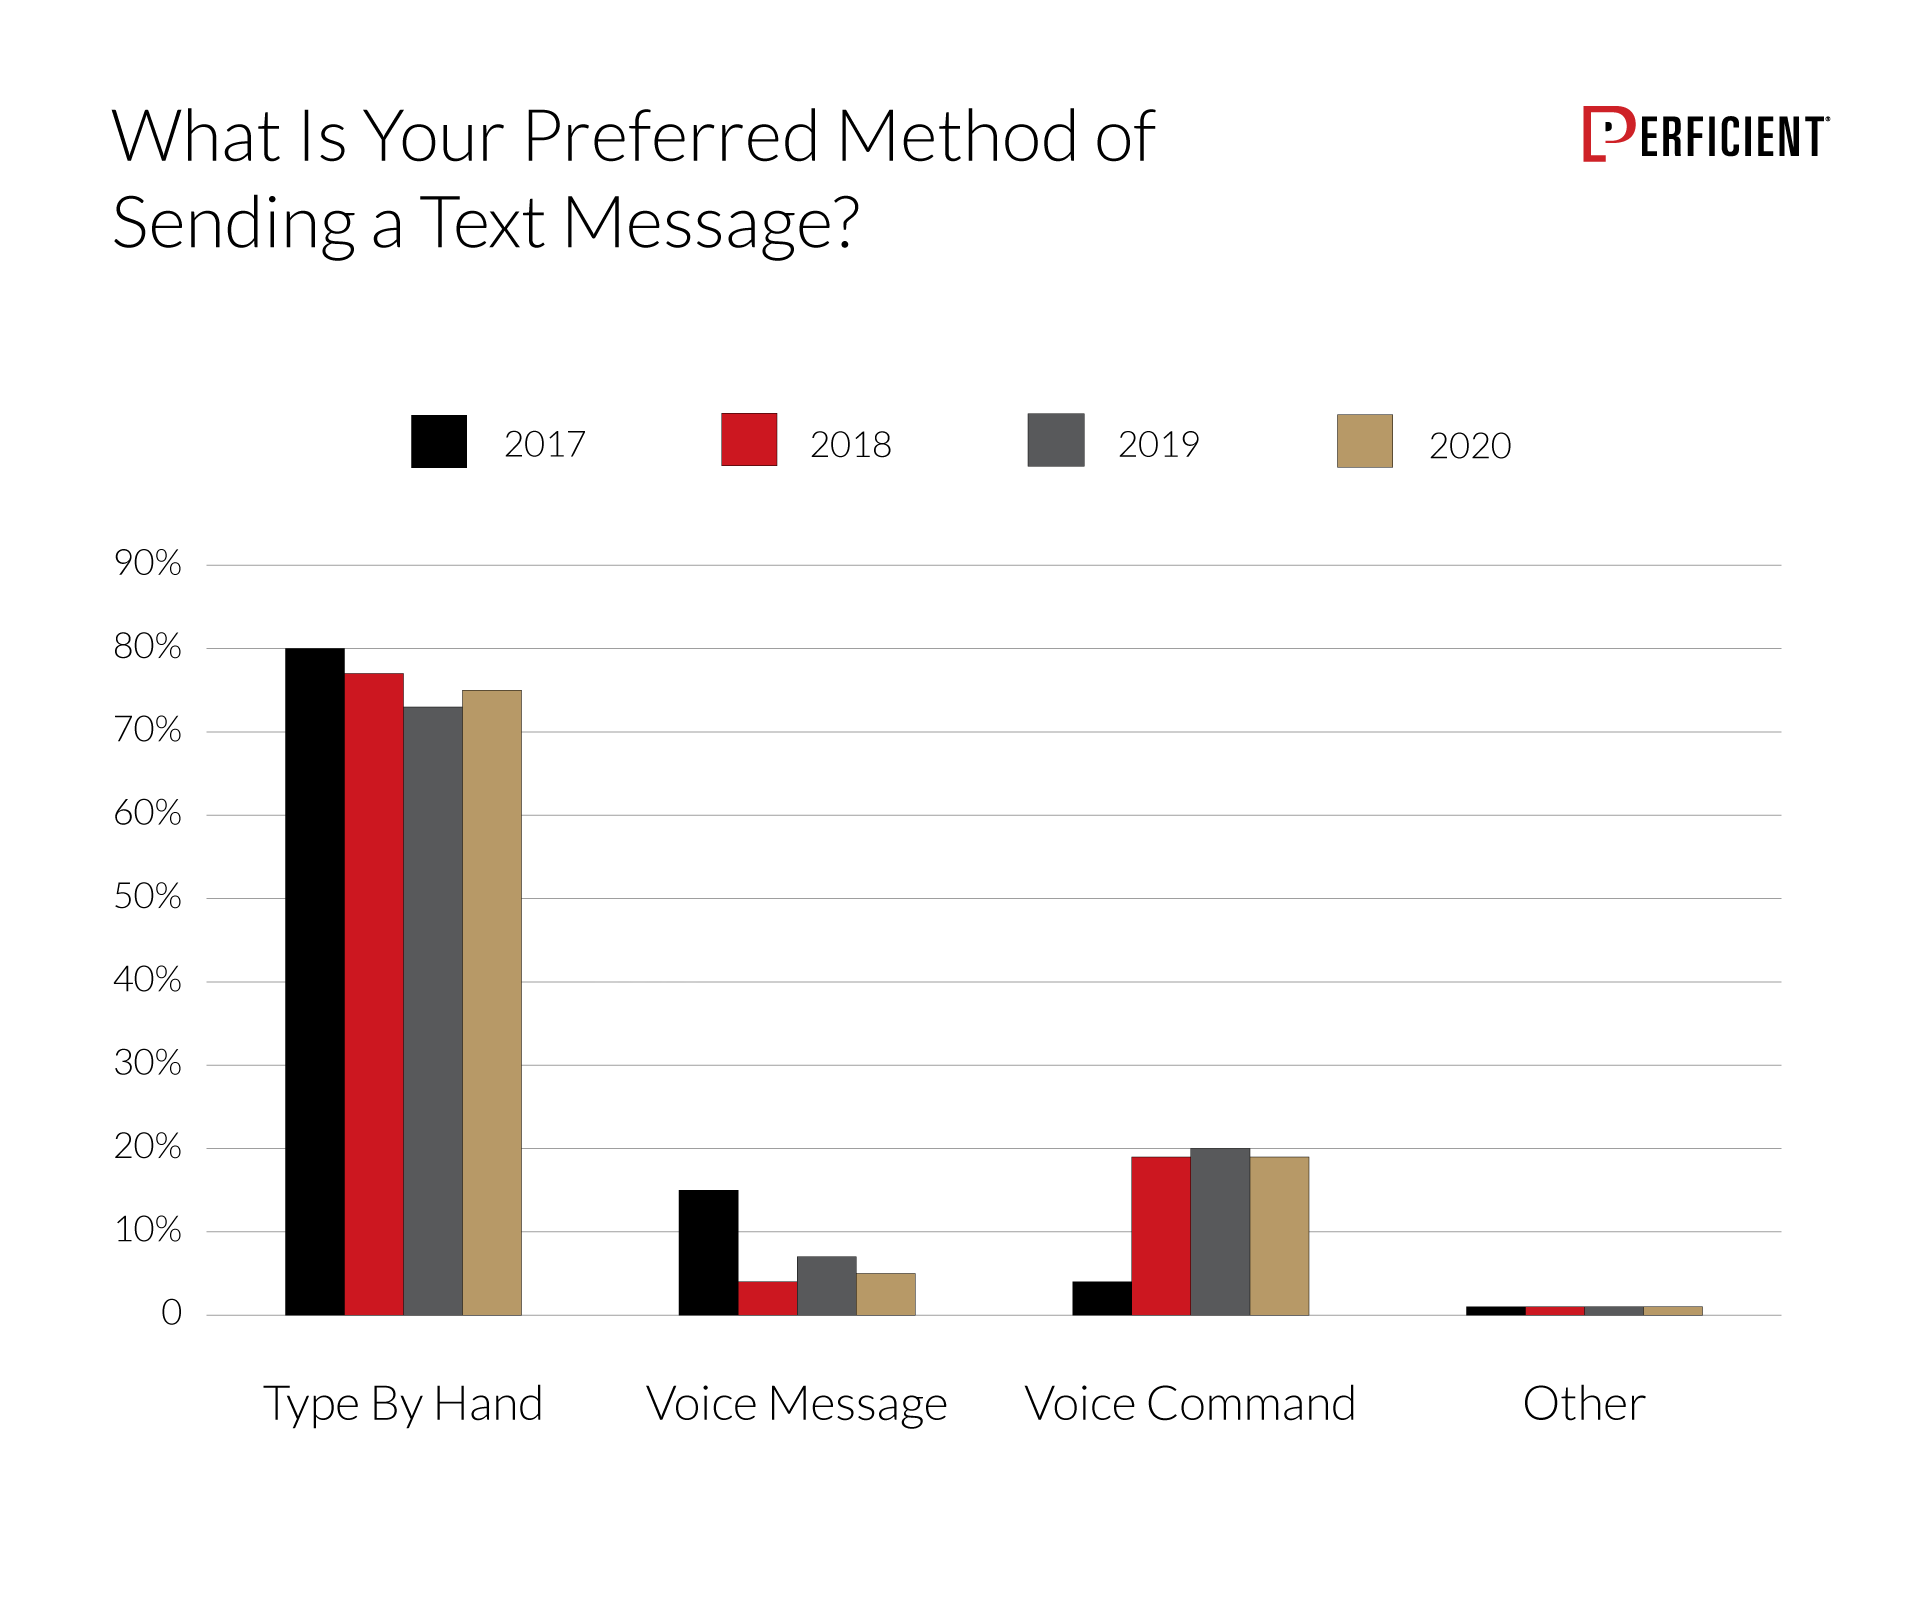 Chart shows user -preferred method of sending a text message